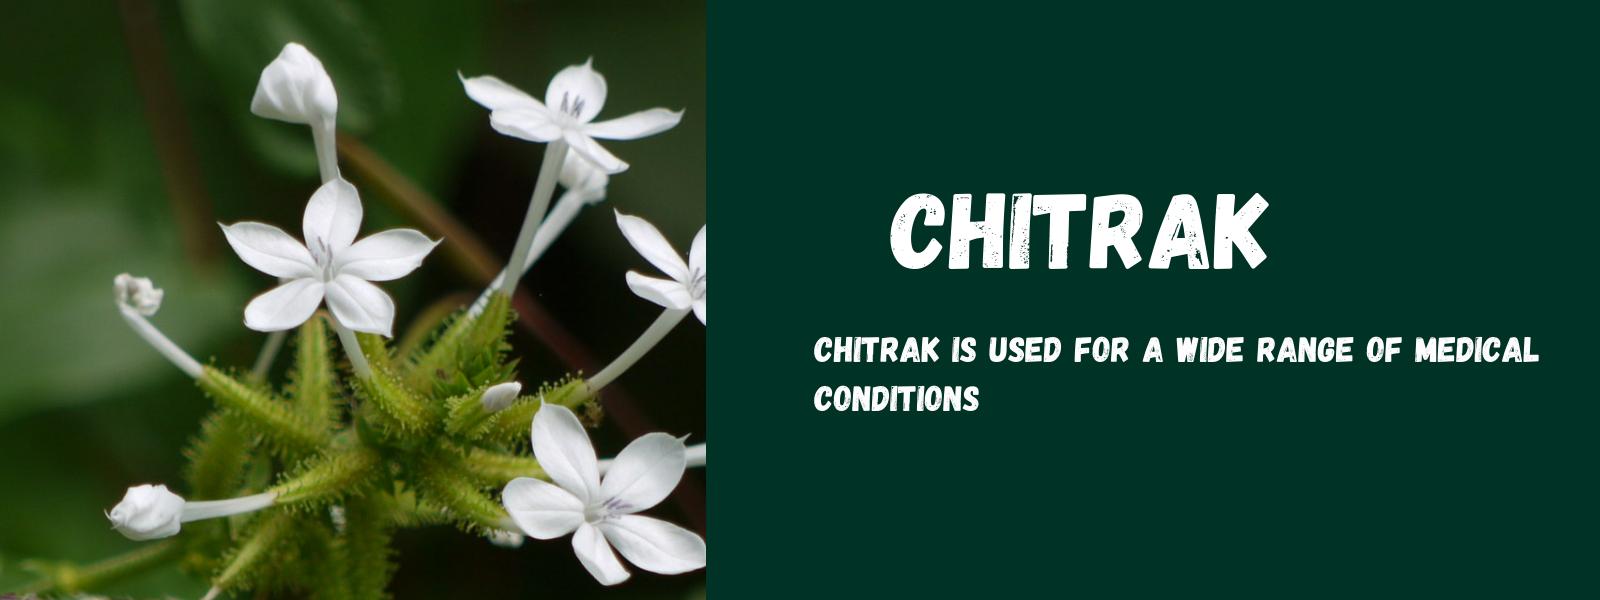 Chitrak - Health Benefits, Uses and Important Facts